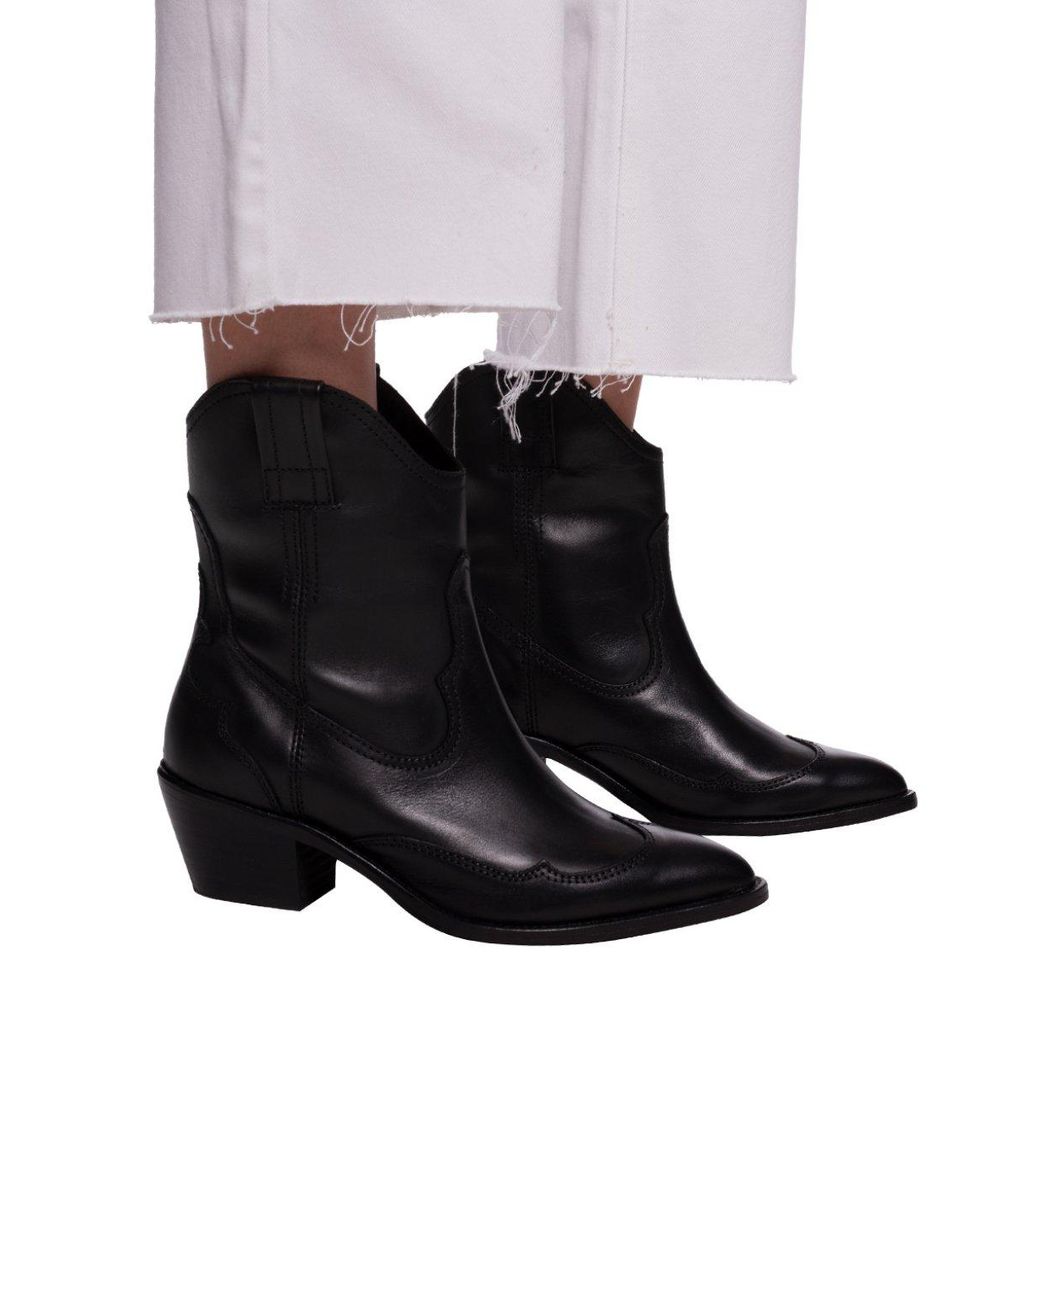 AllSaints 'shira' Heeled Cowboy Boots in Black | Lyst